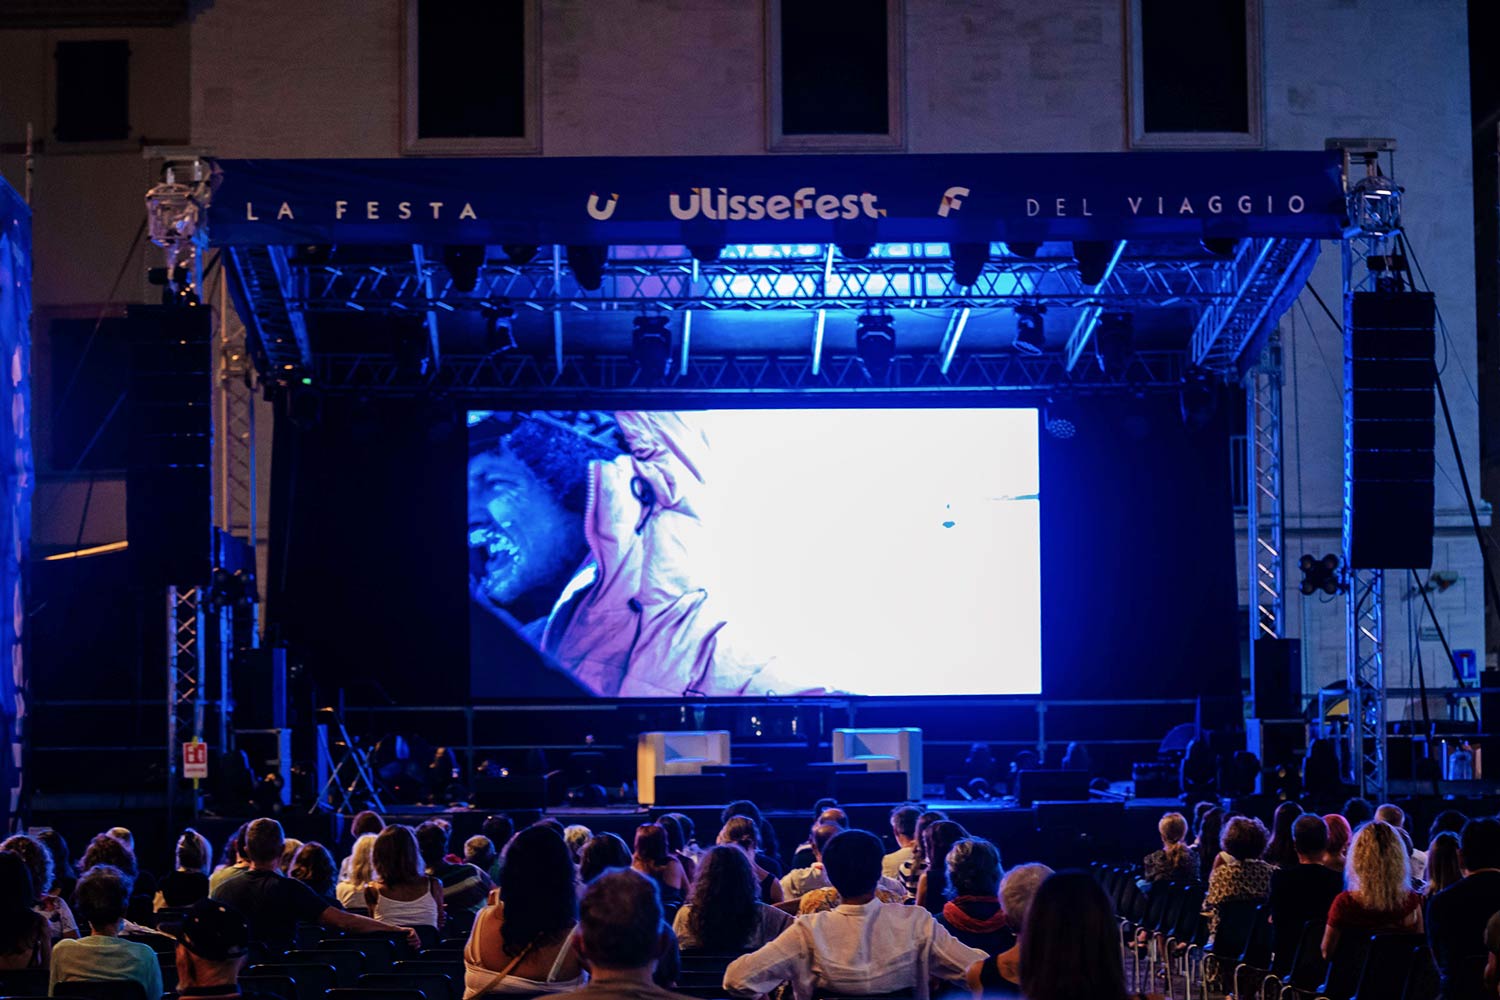 Il palco dell'UlisseFest